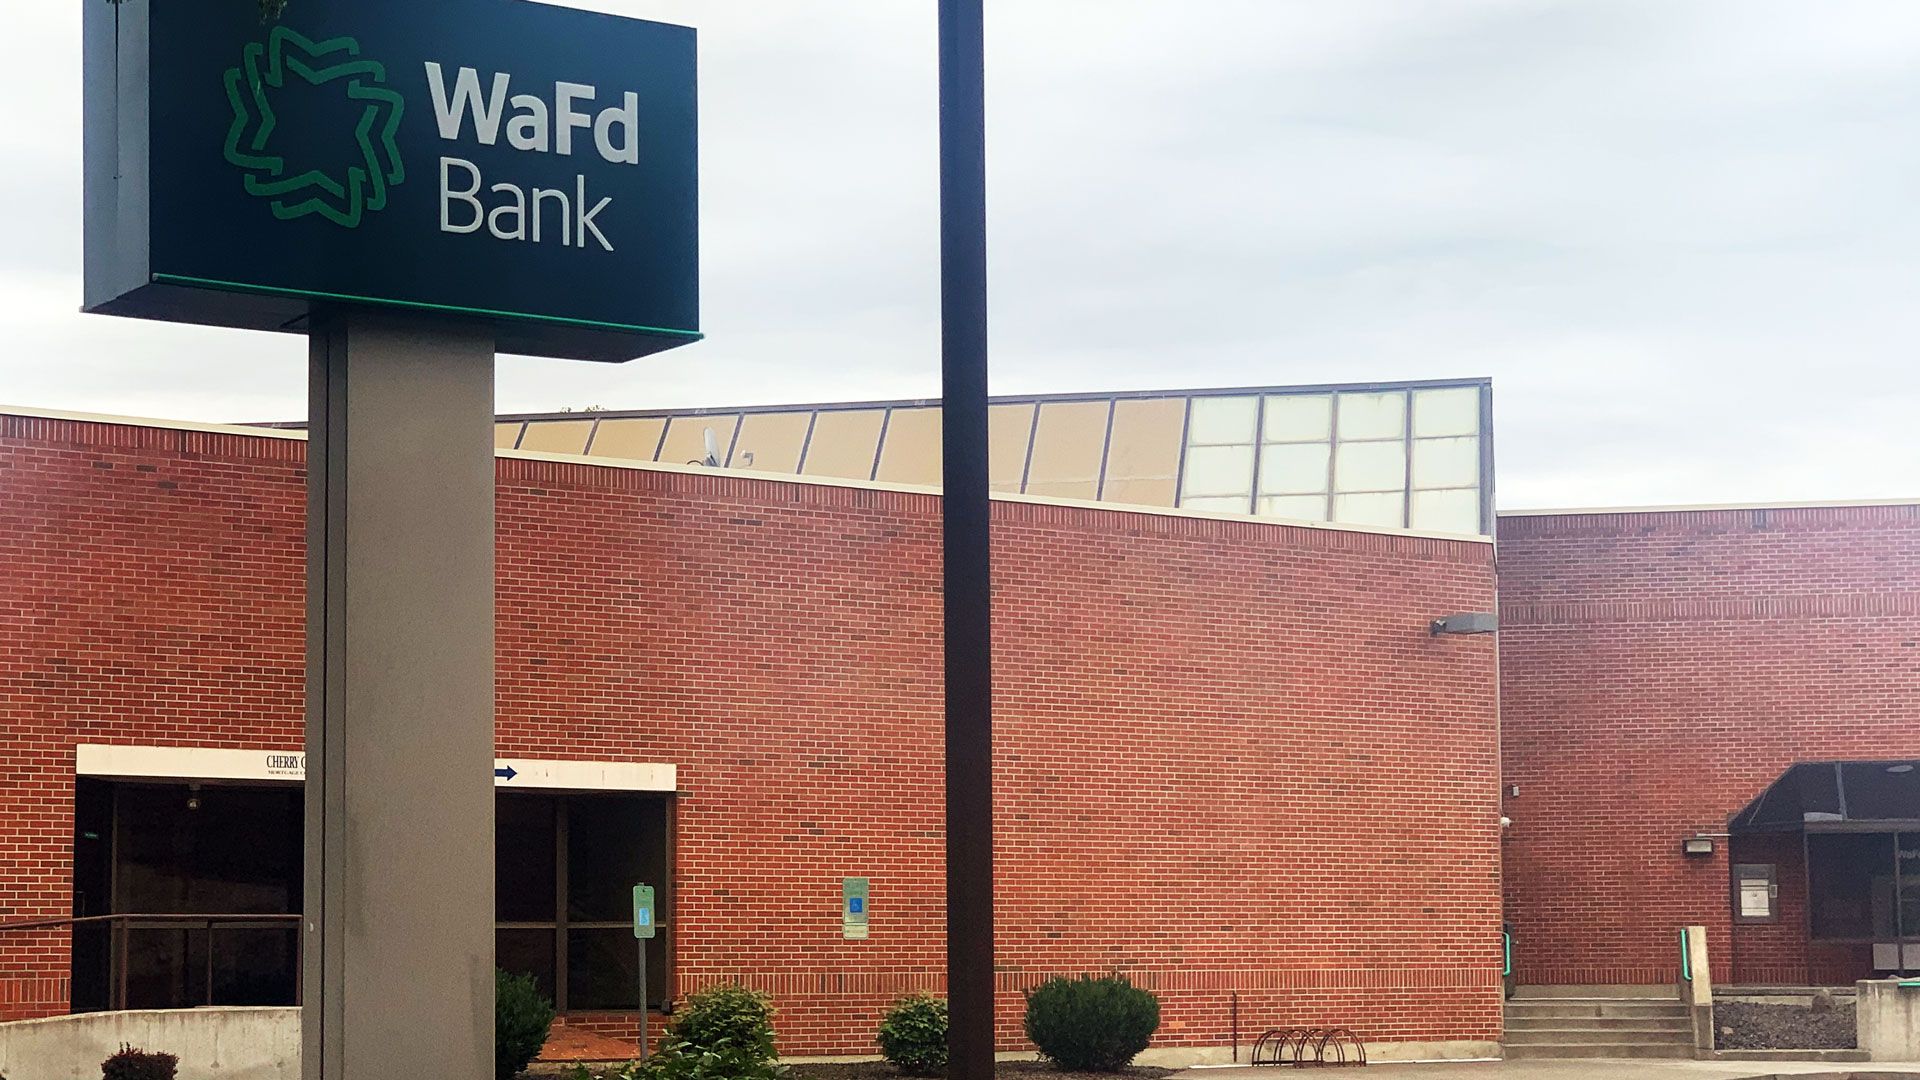 The local WaFd Bank branch building